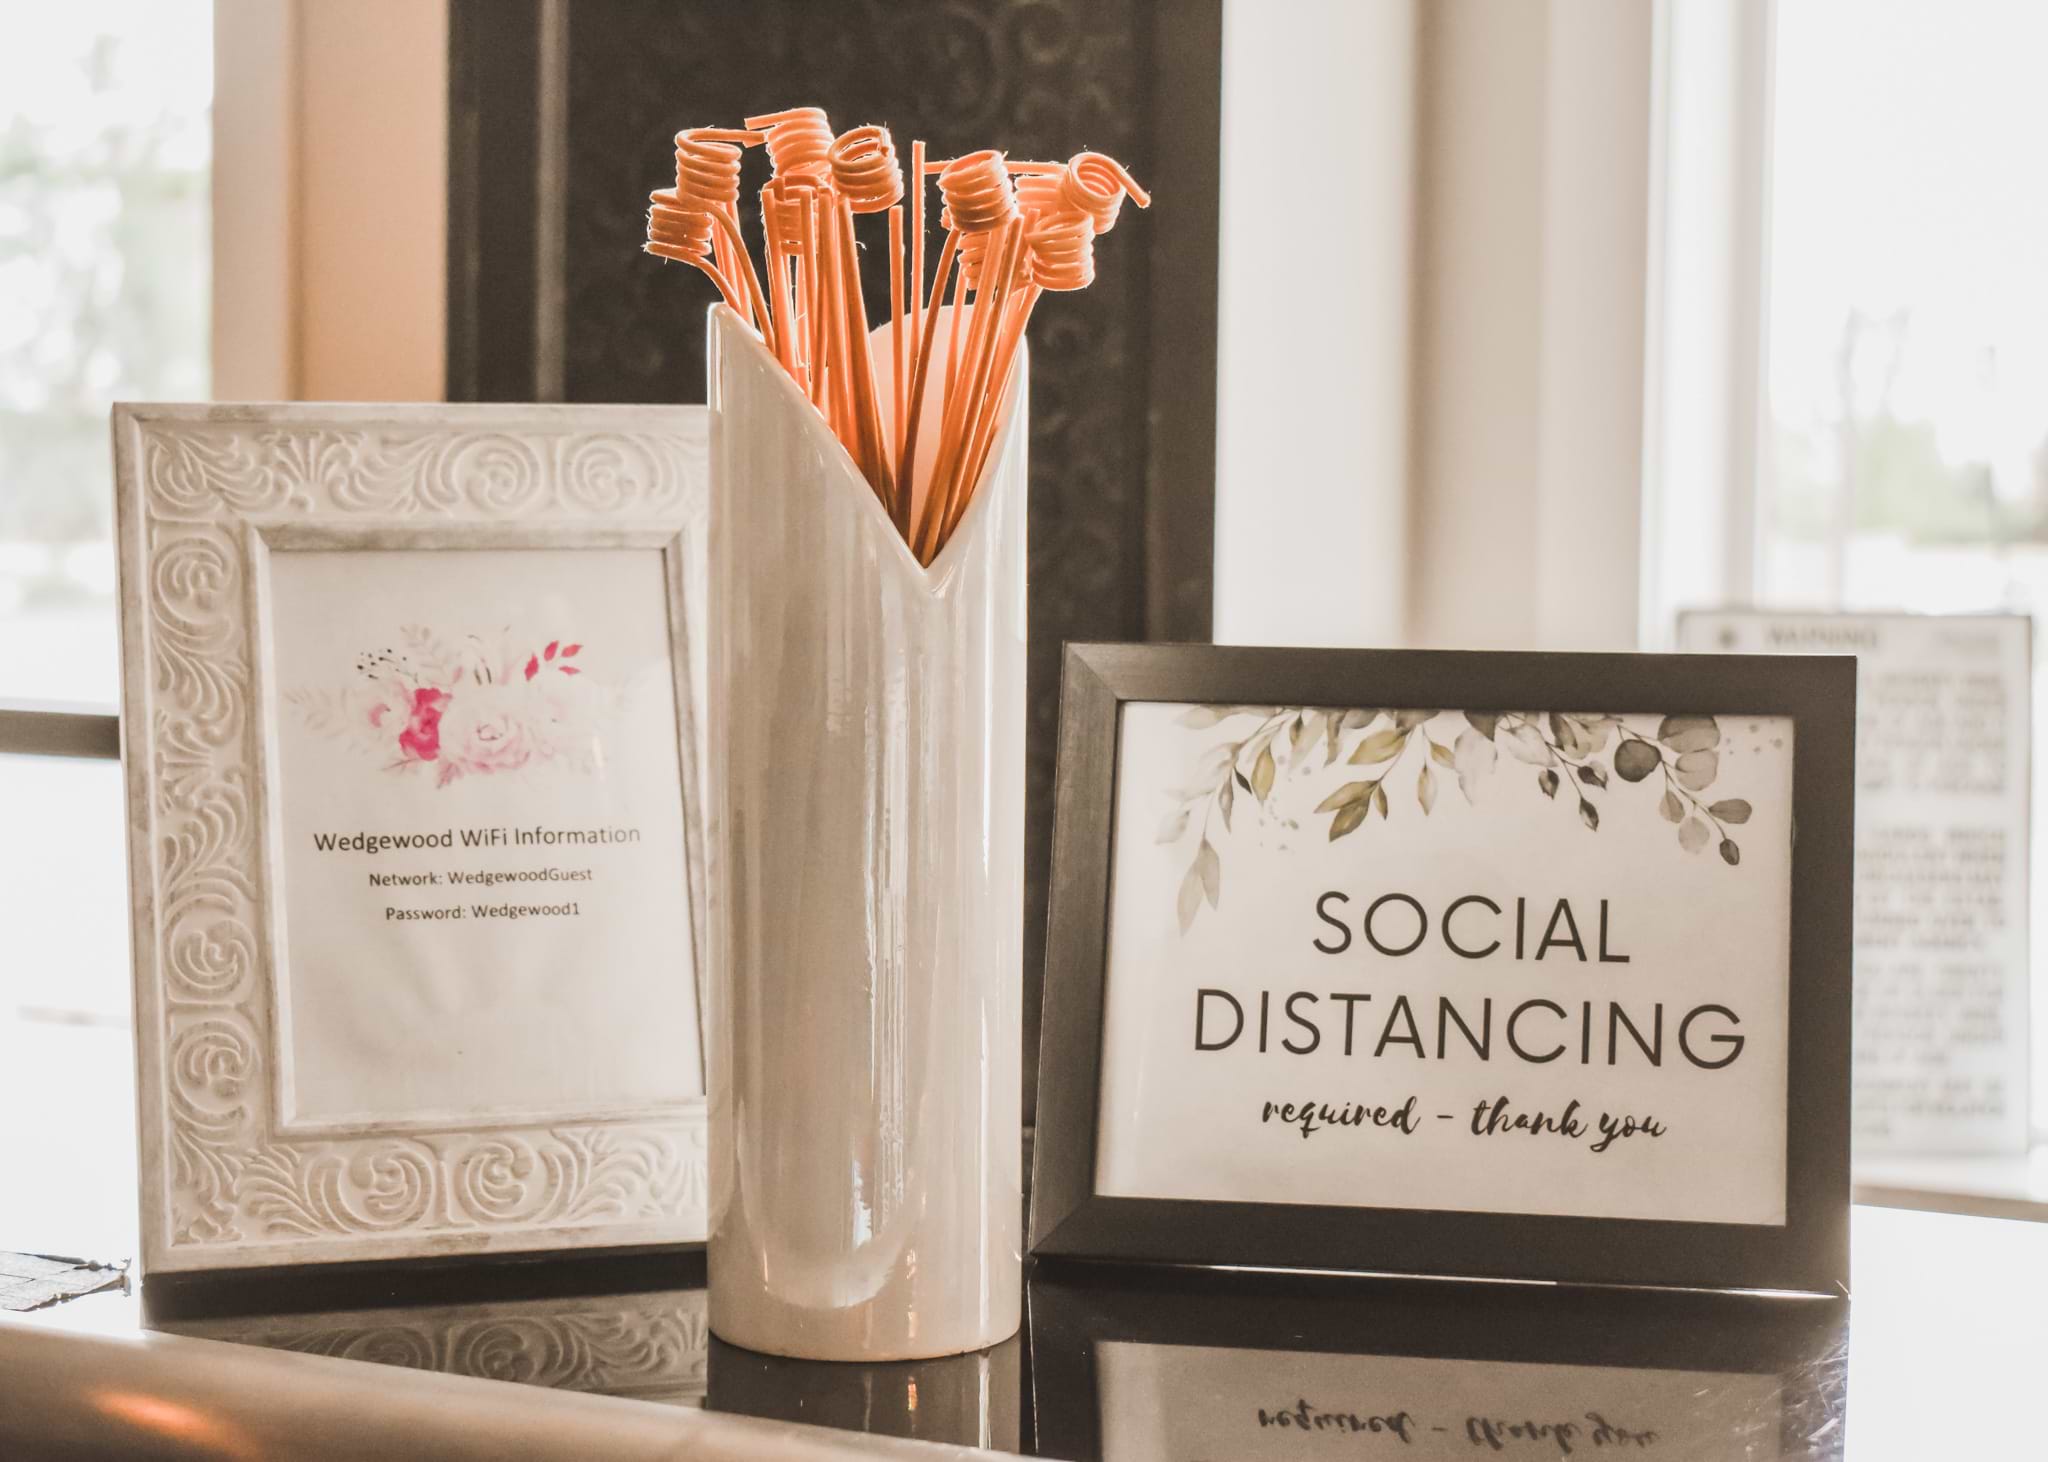 Wedding Safety With Social Distancing at Wedgewood Weddings